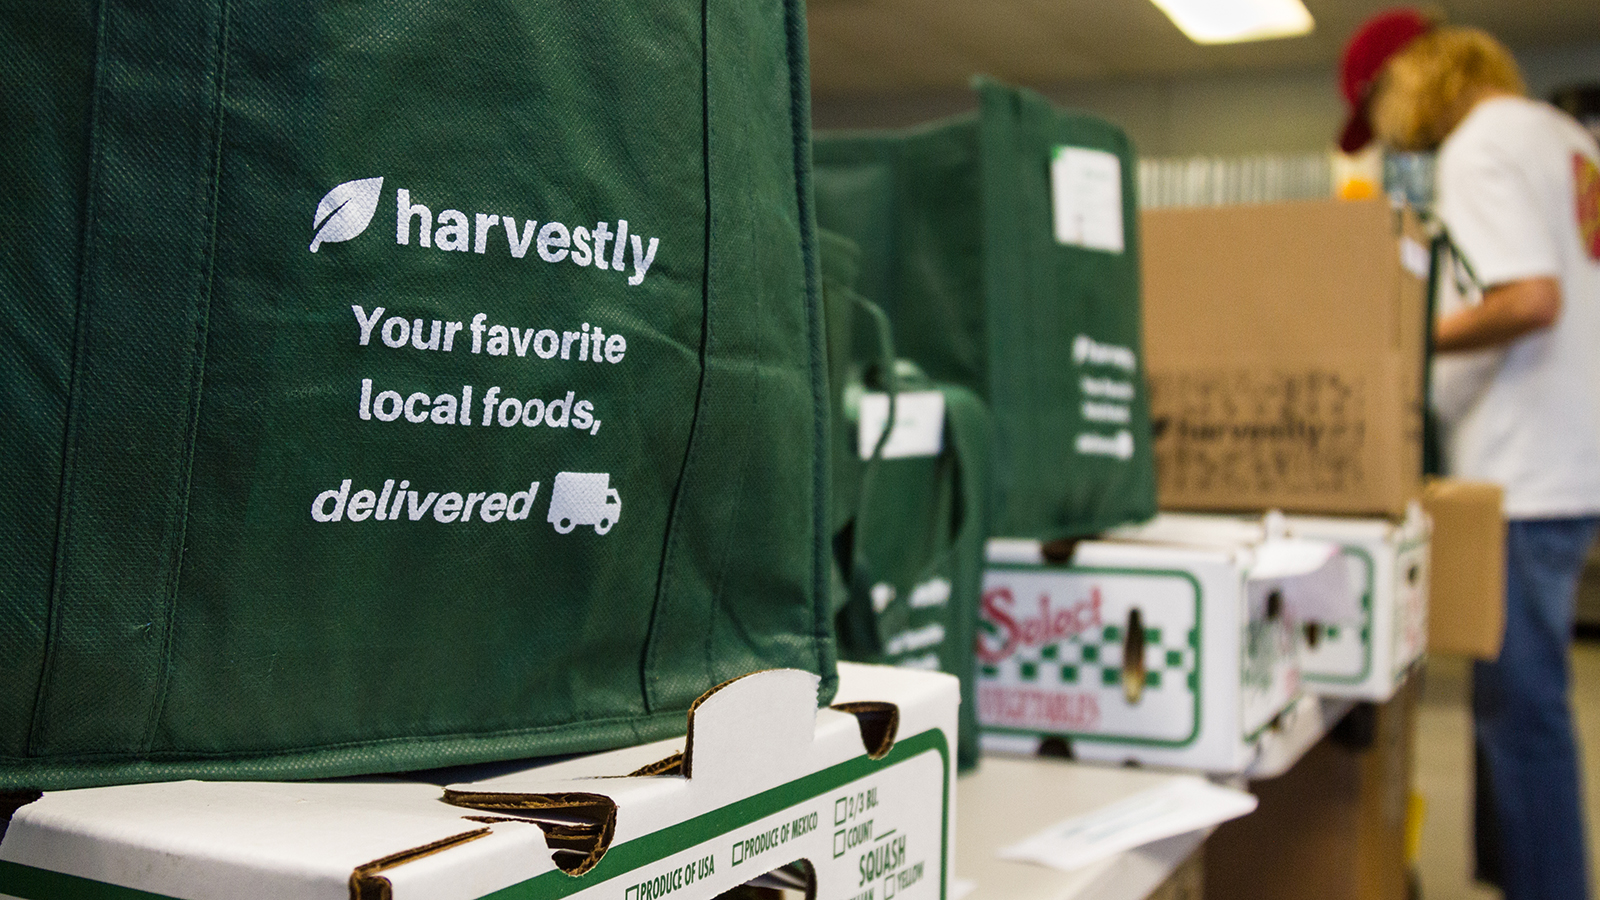 A green tote back, filled with foods and printed with the words "Harvestly - your favorite local foods delivered" sits on a table with produce boxes, while a young man in the background packs another bag.